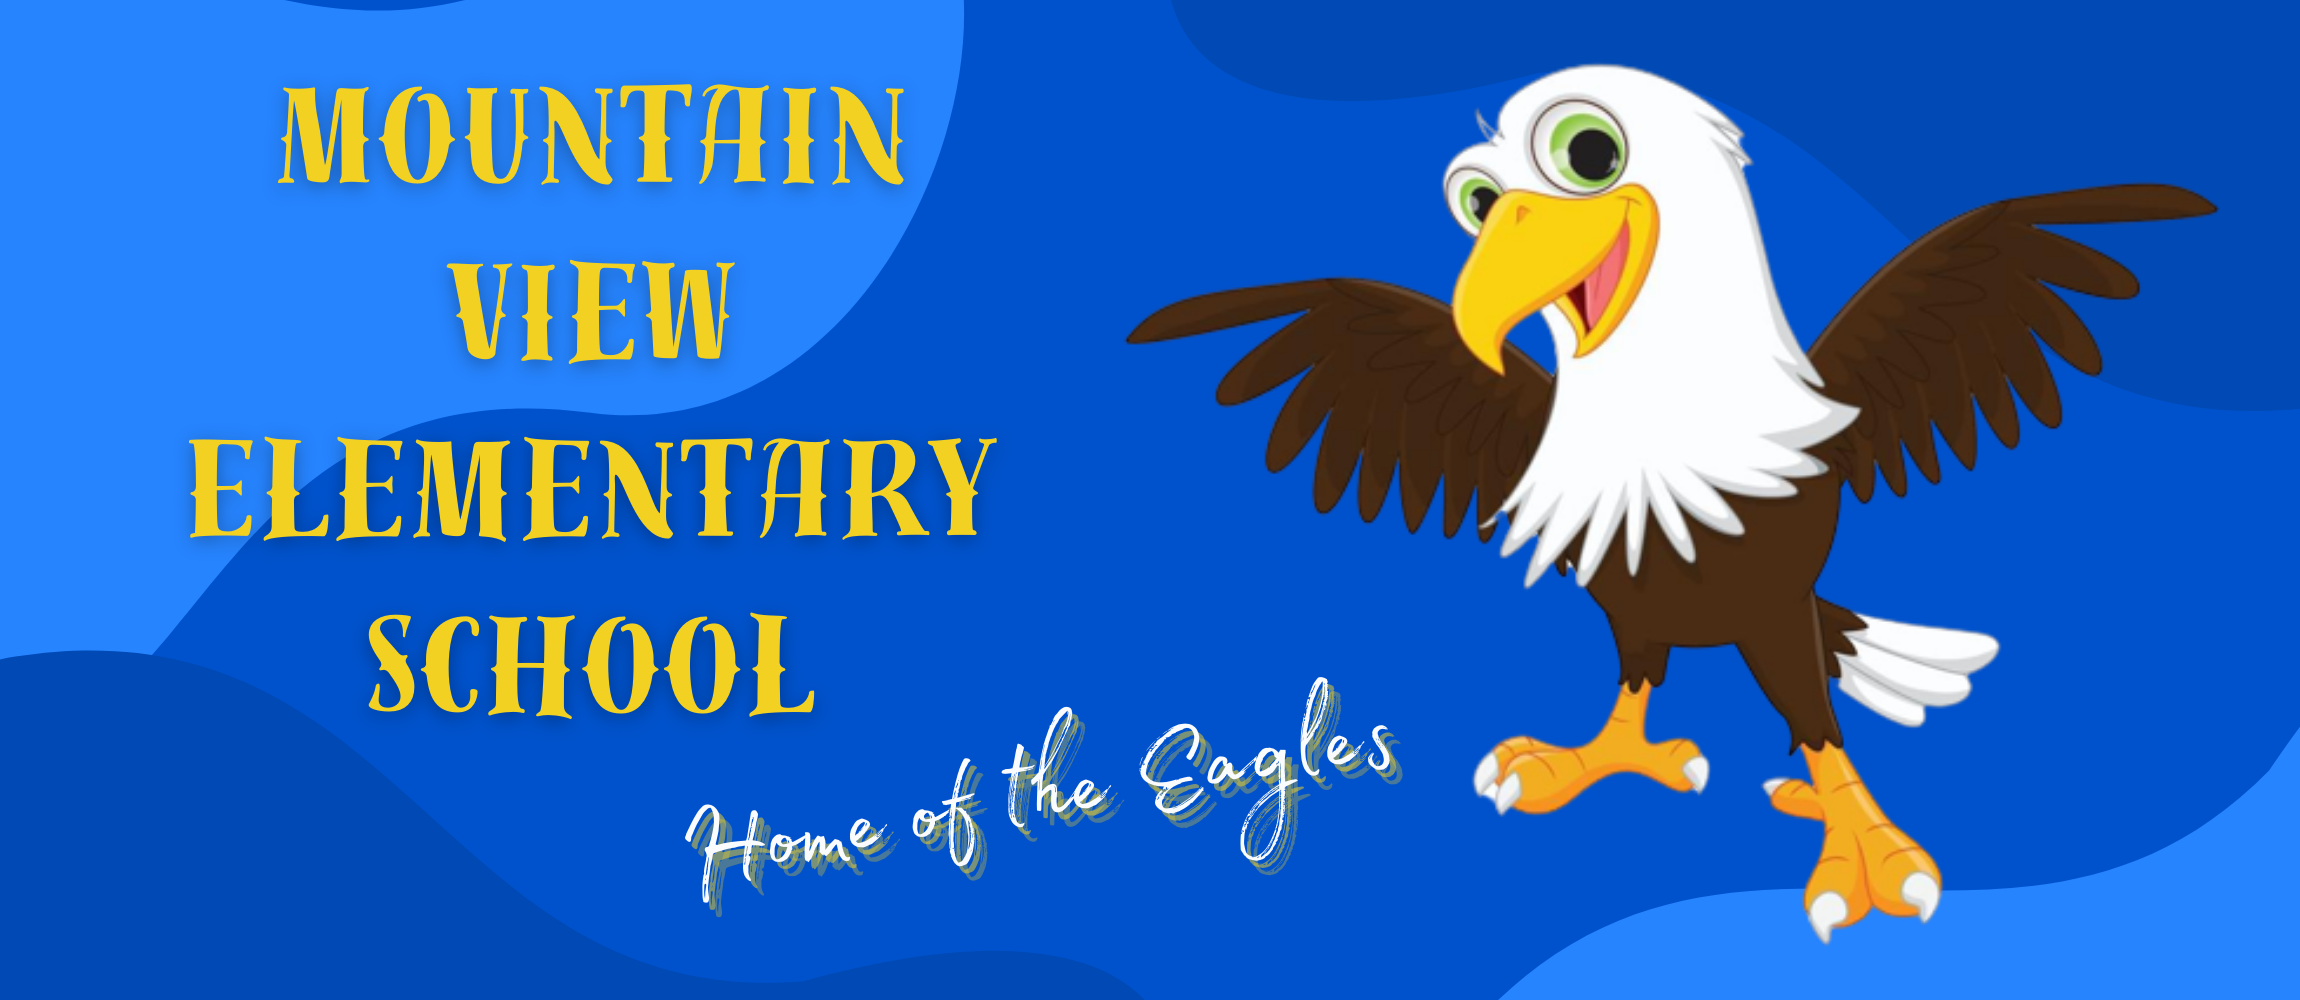 Mountain View Elementary School - Home of the Eagles